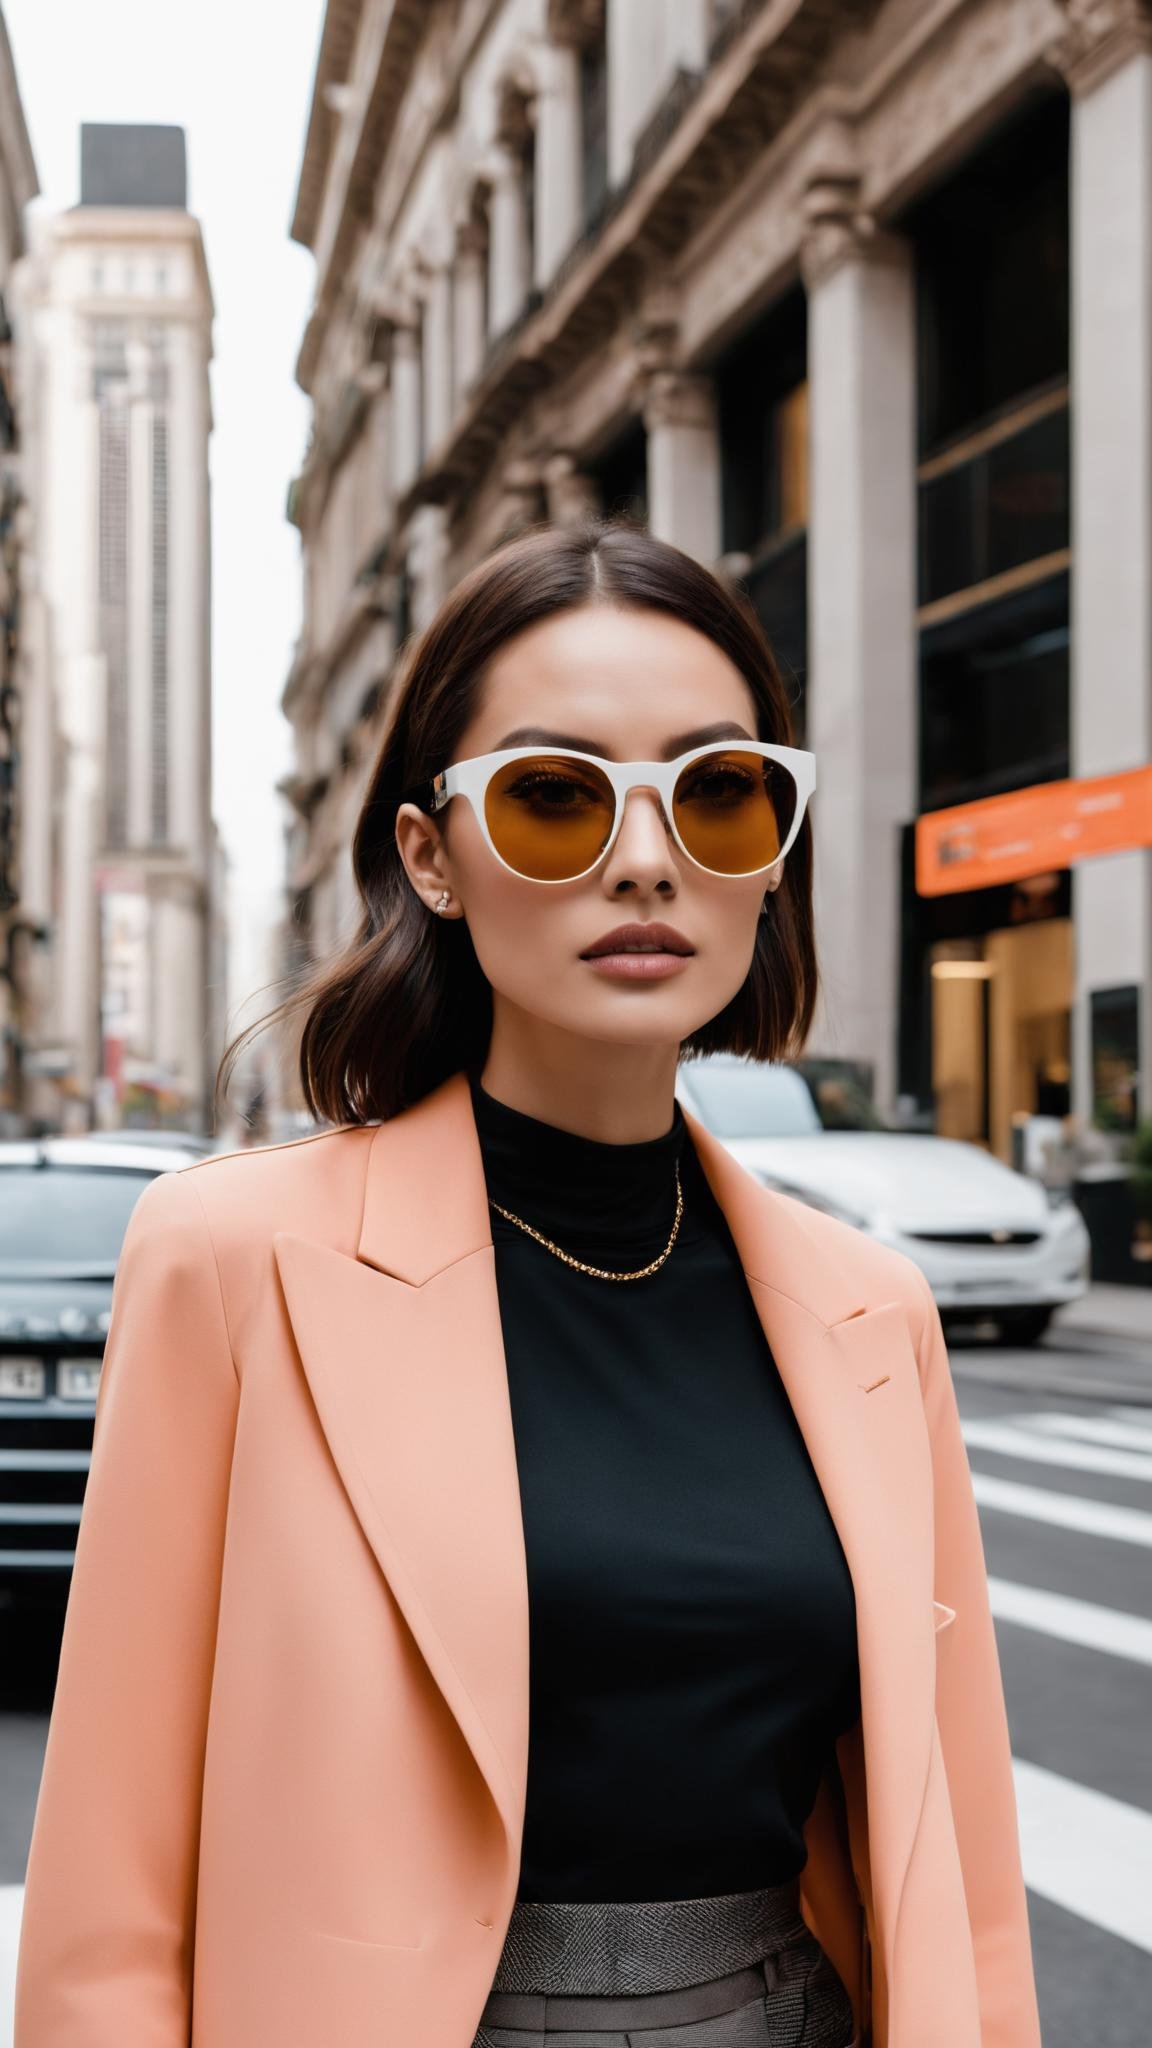 A stylish cityscape:1.2 with fashion-forward individuals wearing designer eyewear, a testament to the role eyeglasses play in elevating one's personal style in the urban landscape.